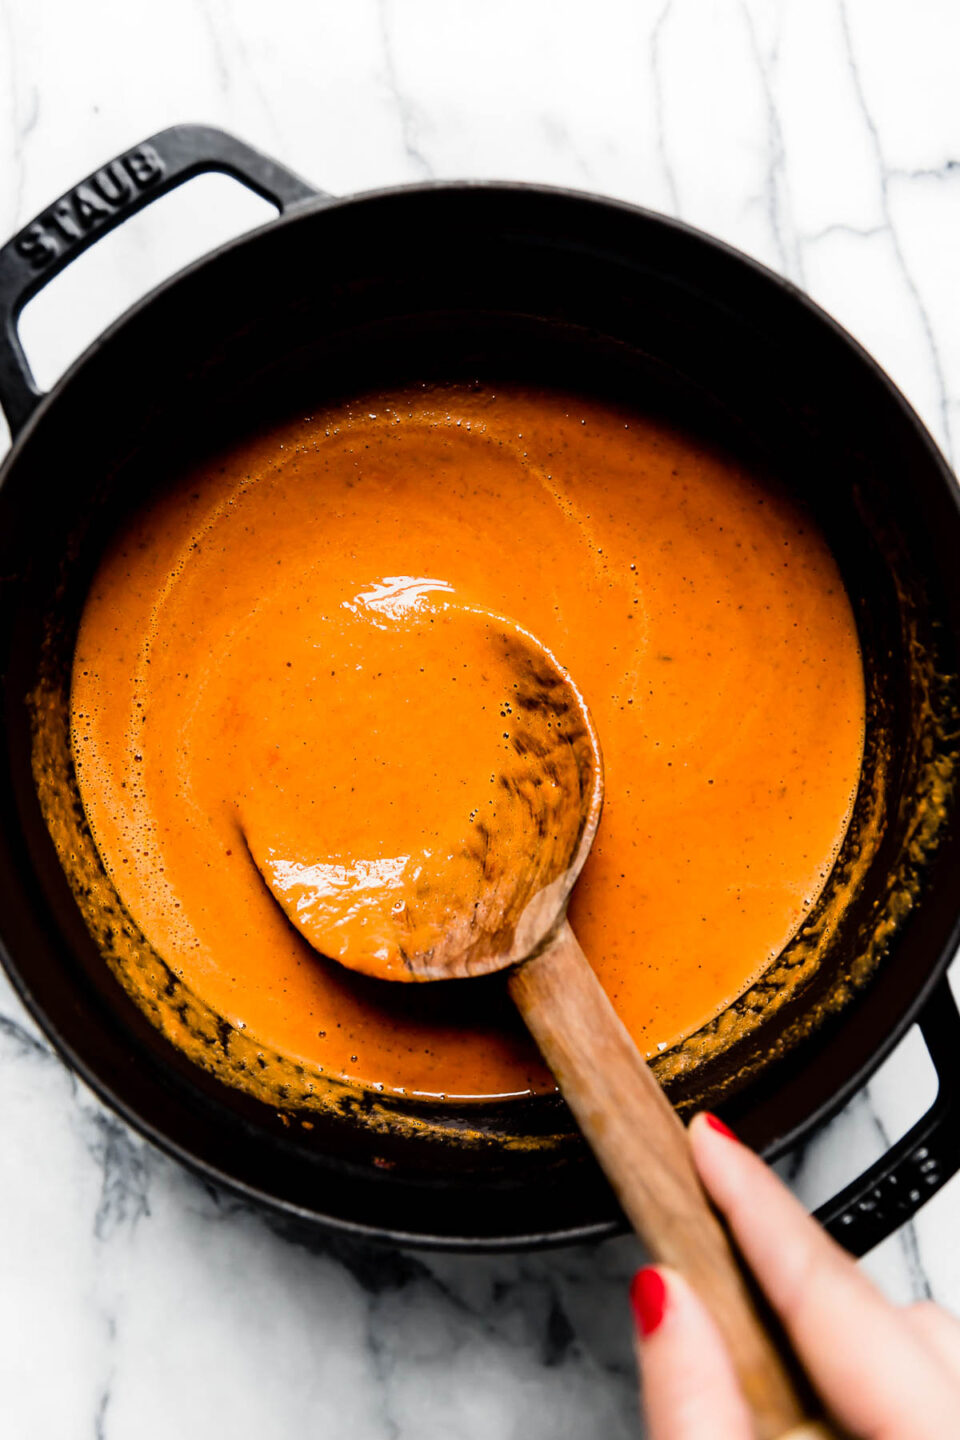 Creamy Roasted Red Pepper Soup, blended & topped with cracked black pepper, in a black Staub dutch oven. A woman's manicured hand is reaching into the Dutch oven with a wooden spoon to stir the soup.